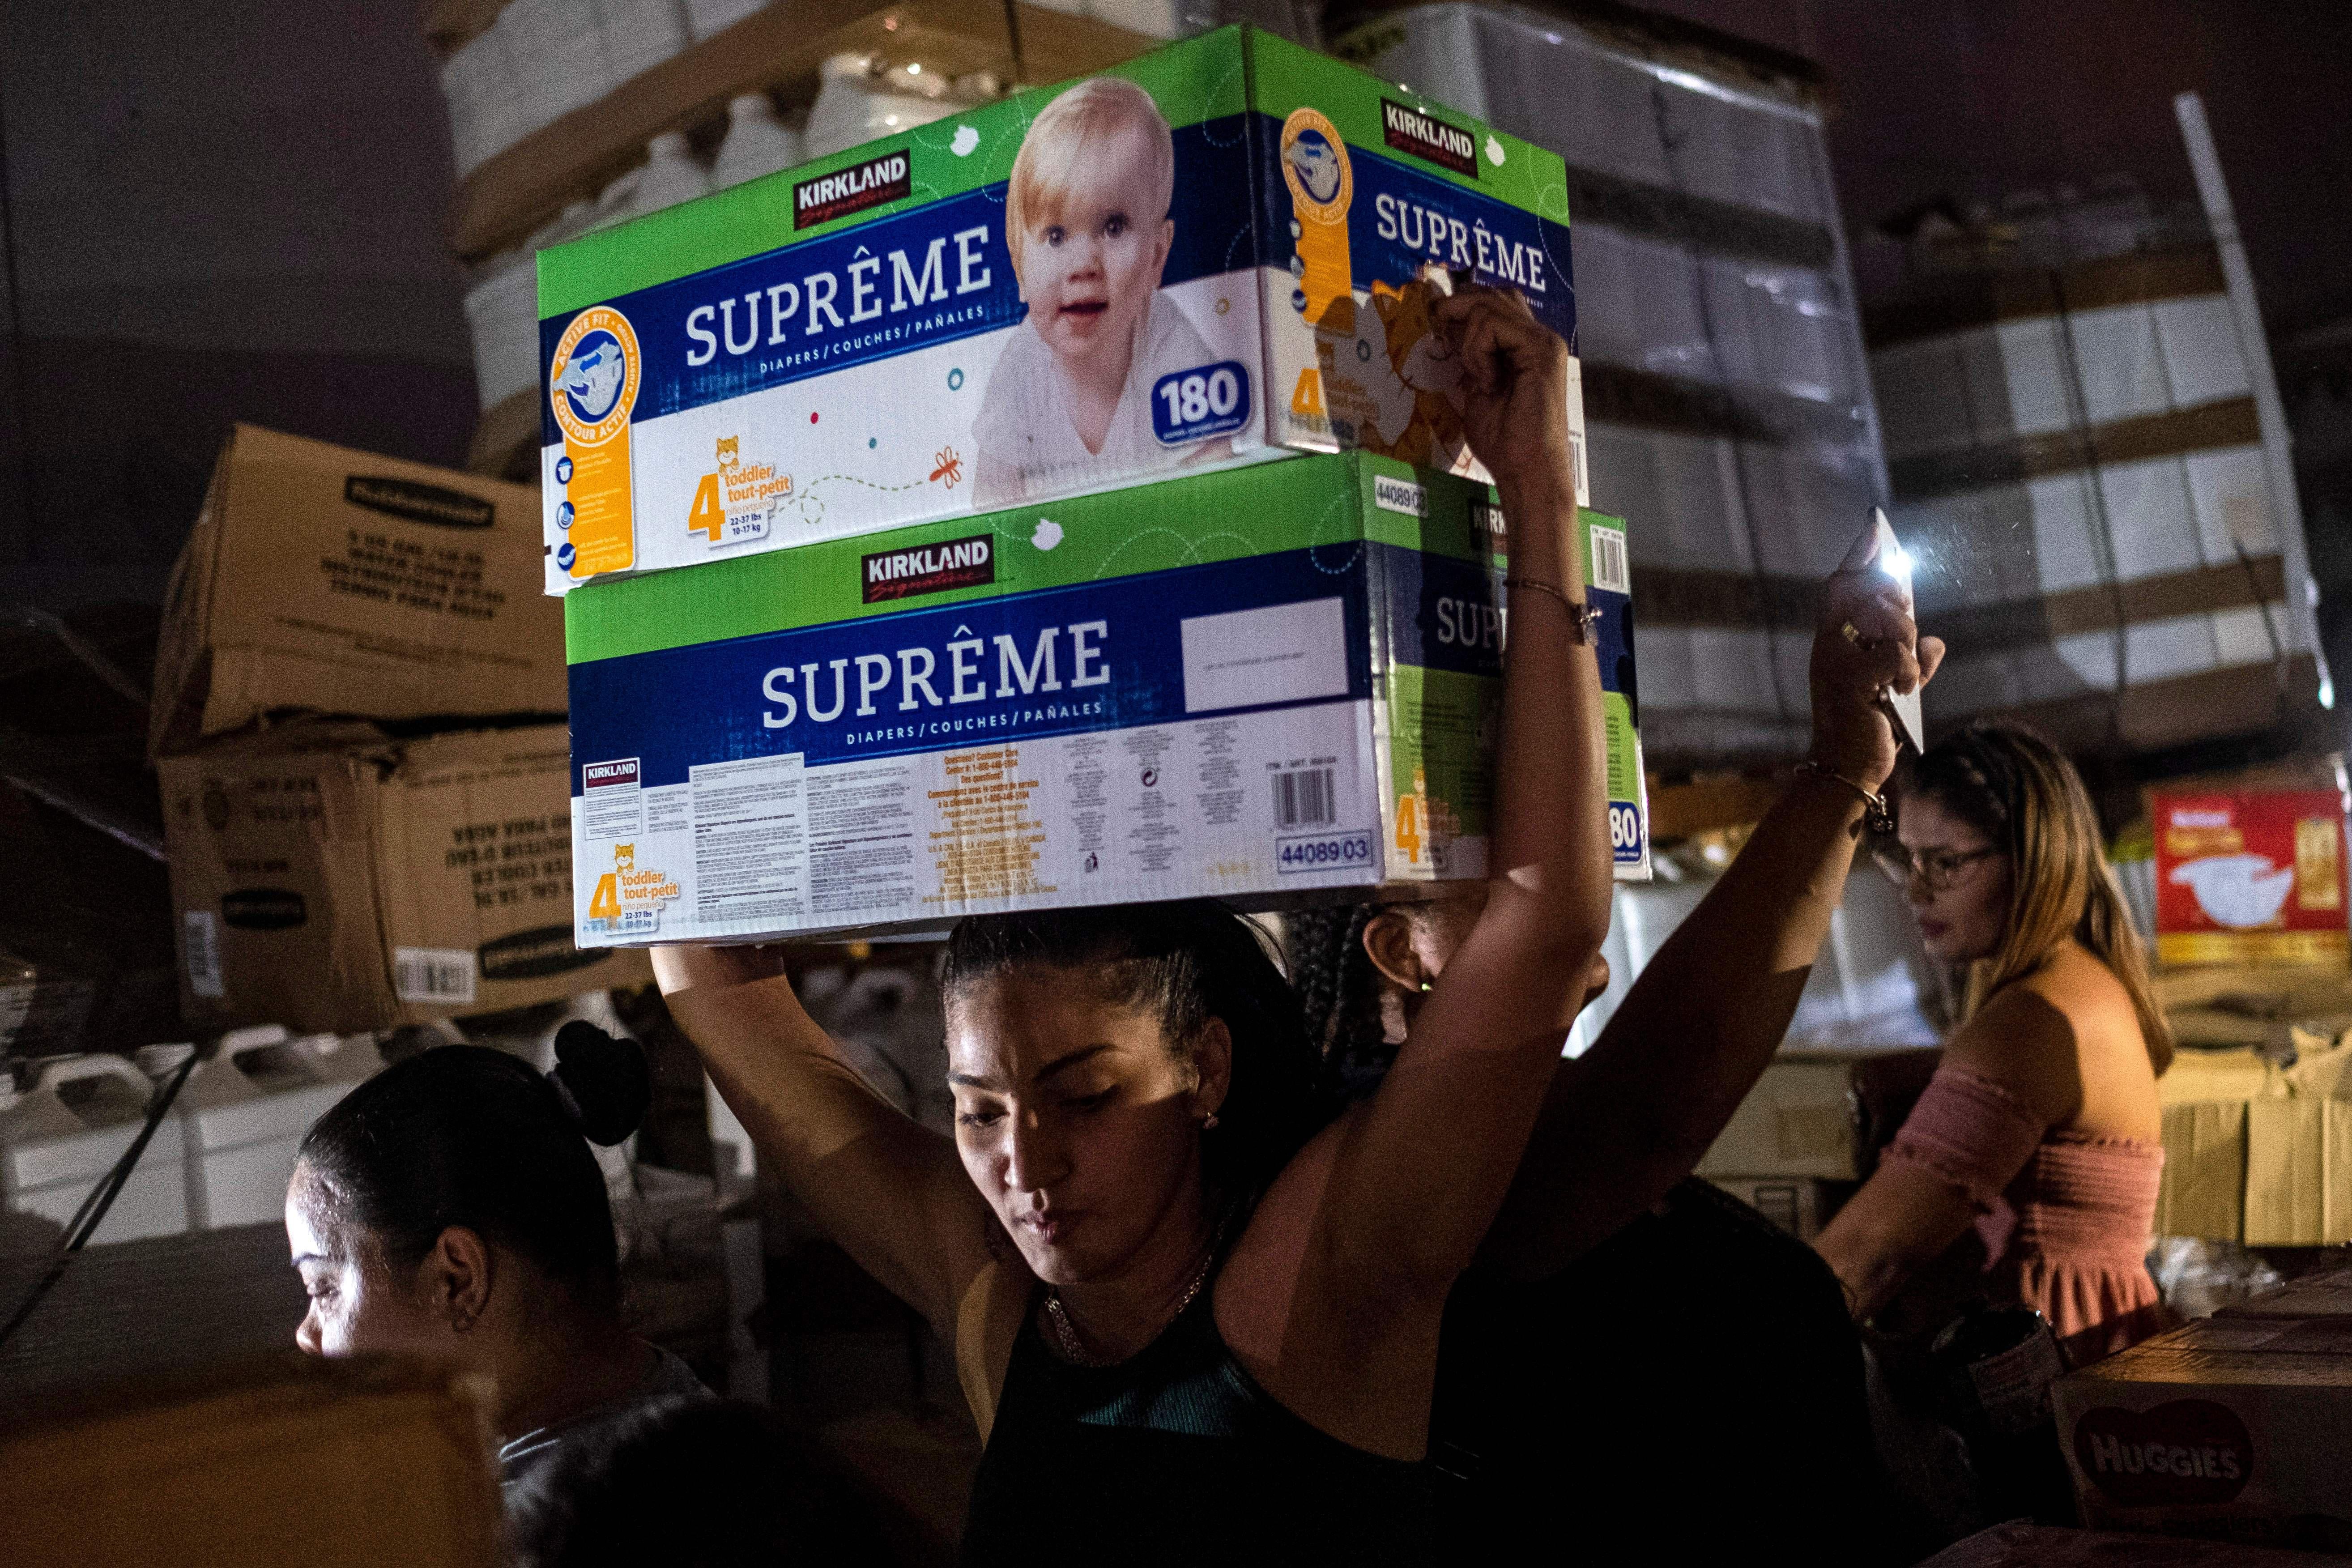 A woman carries boxes of baby diapers from warehouse filled with supplies, including thousands of cases of water, believed to have been from when Hurricane Maria struck the island in 2017 in Ponce, Puerto Rico on January 18, 2020.